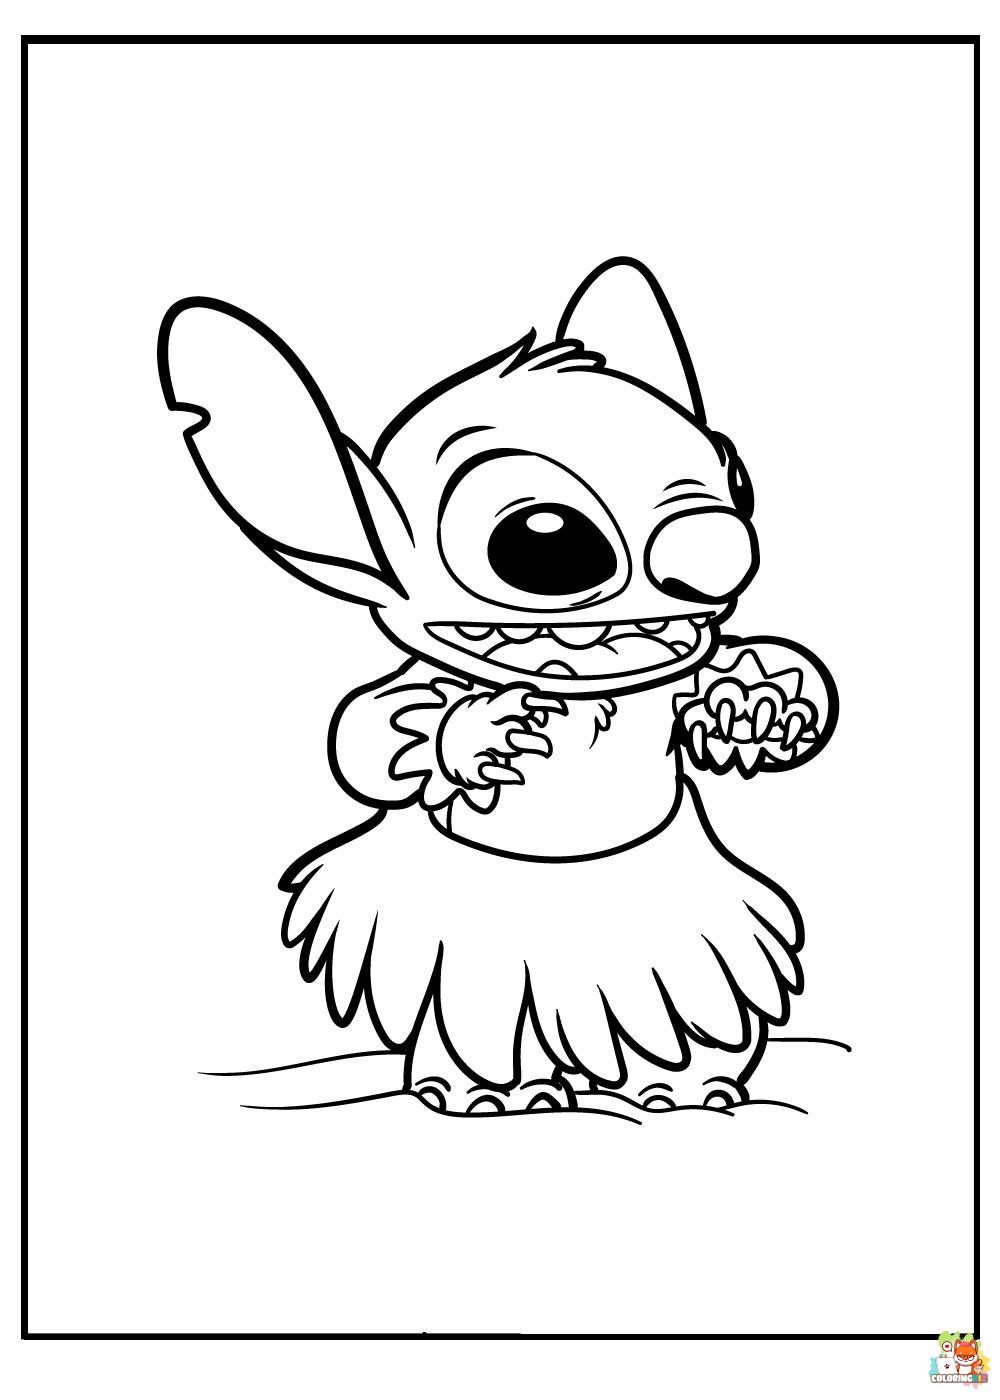 Stitch on the Beach Coloring Pages 9